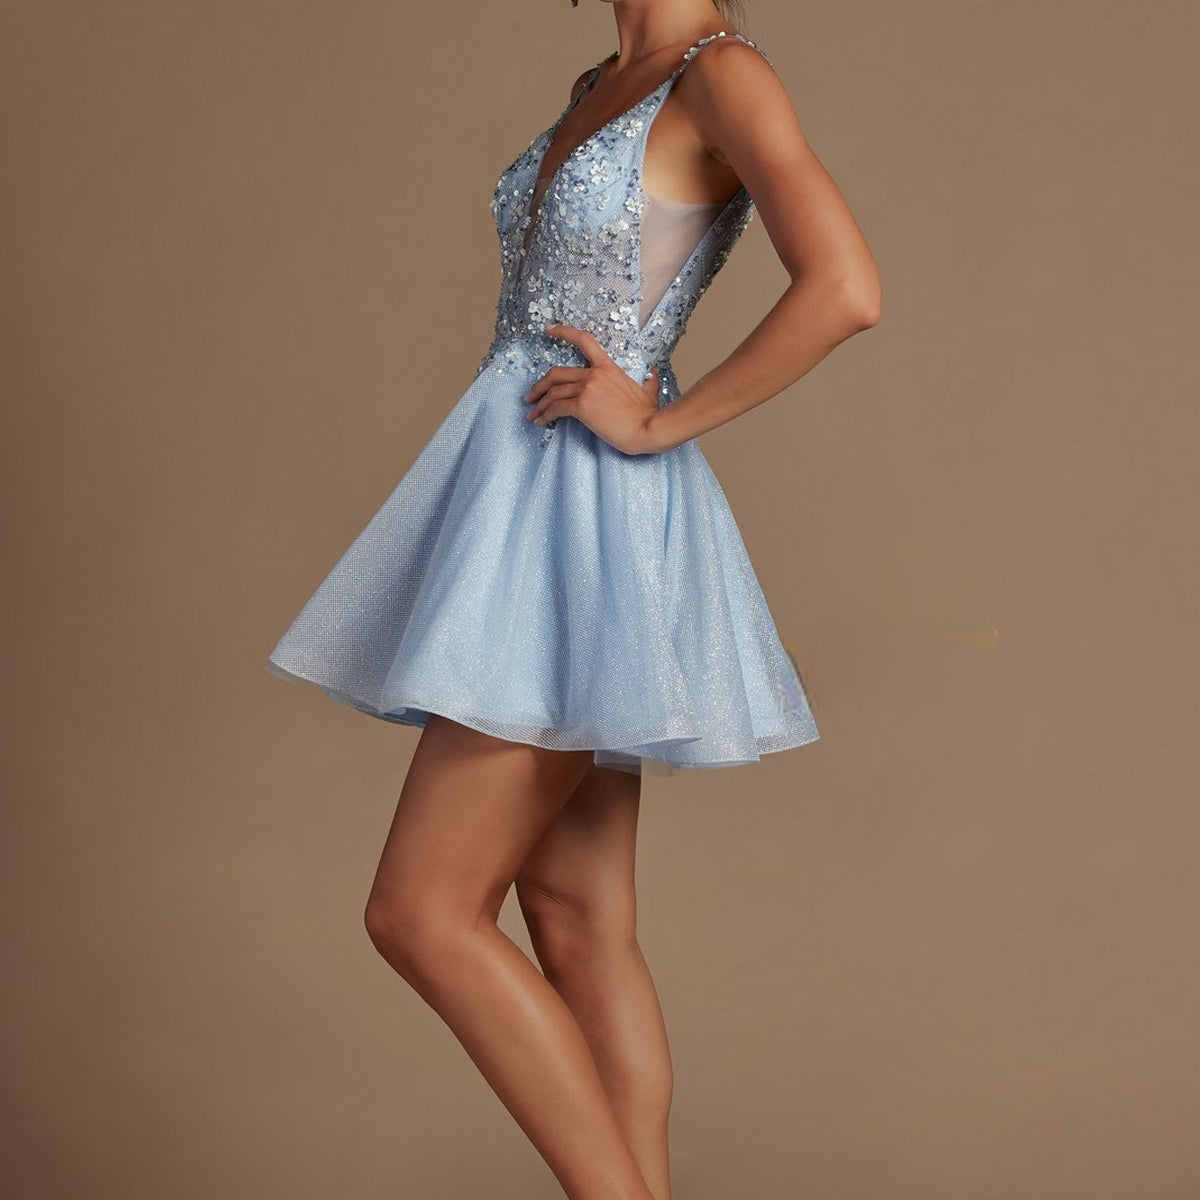 Glittery Floral Embroidered Bodice Short Dress for Homecoming & Cocktail-smcdress